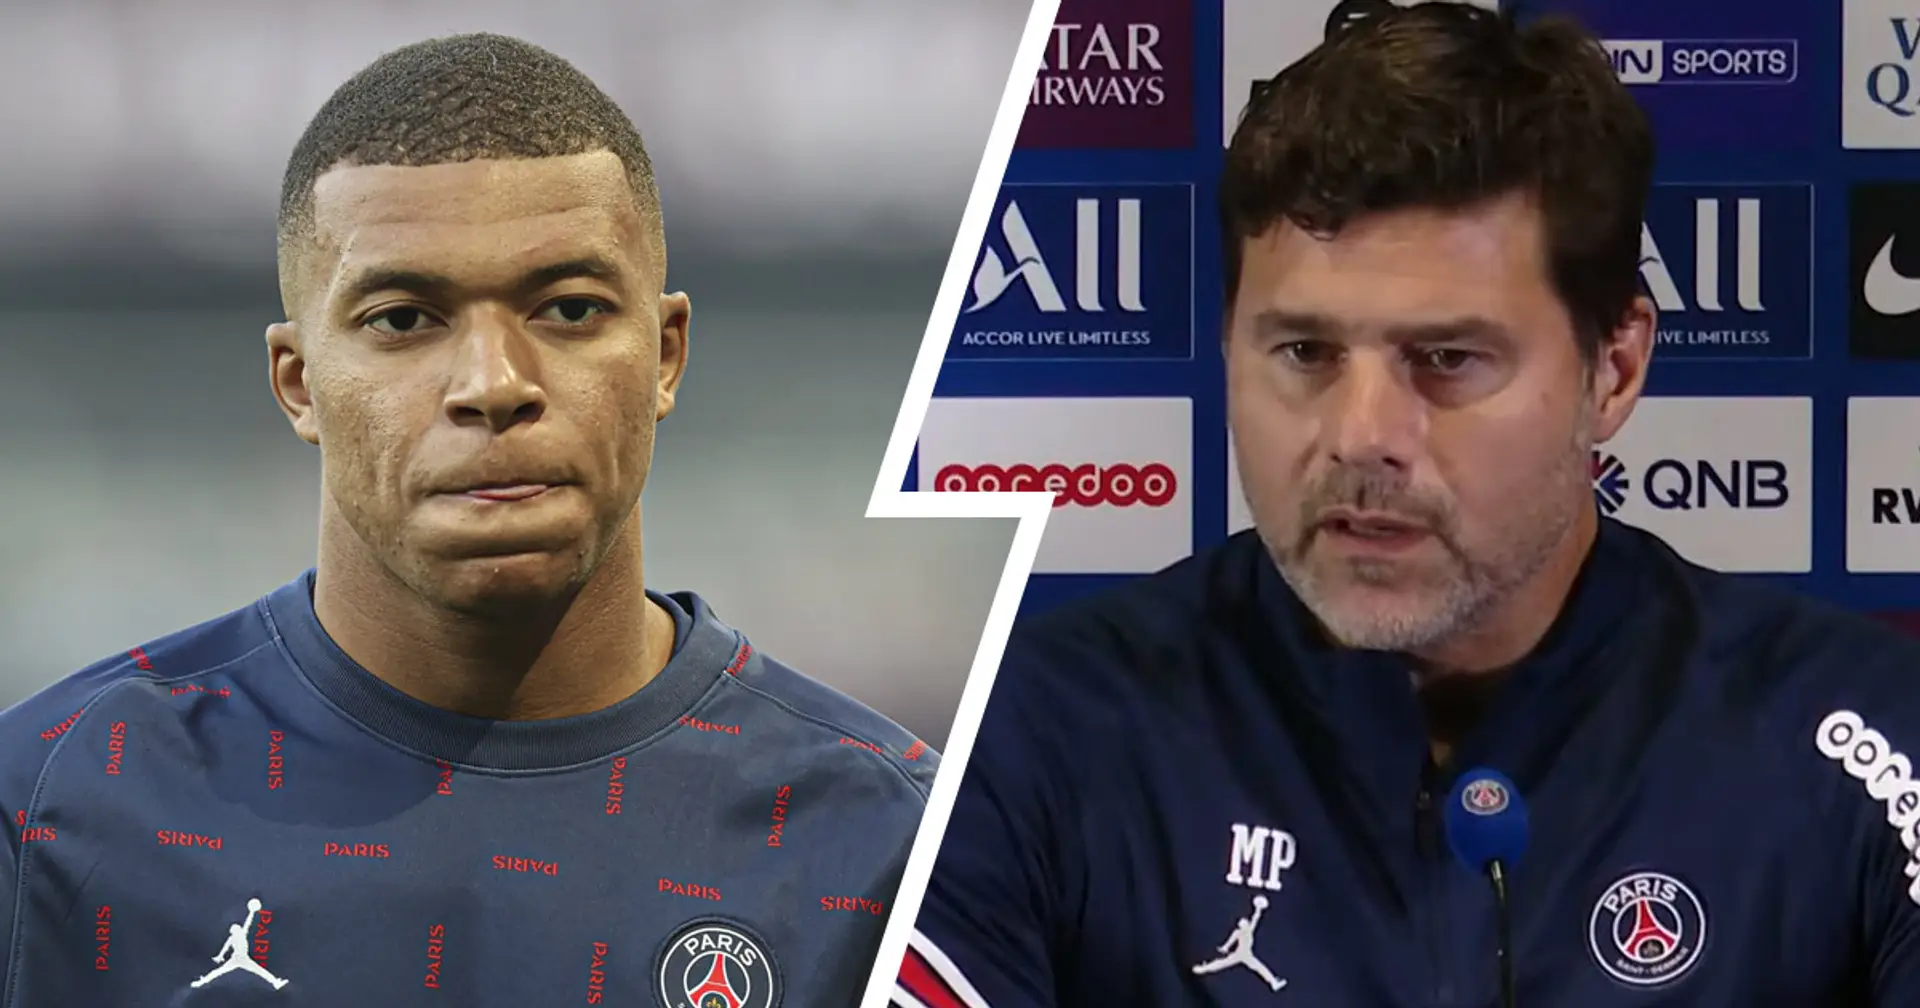 Mauricio Pochettino reacts to Kylian Mbappe's links with Real Madrid